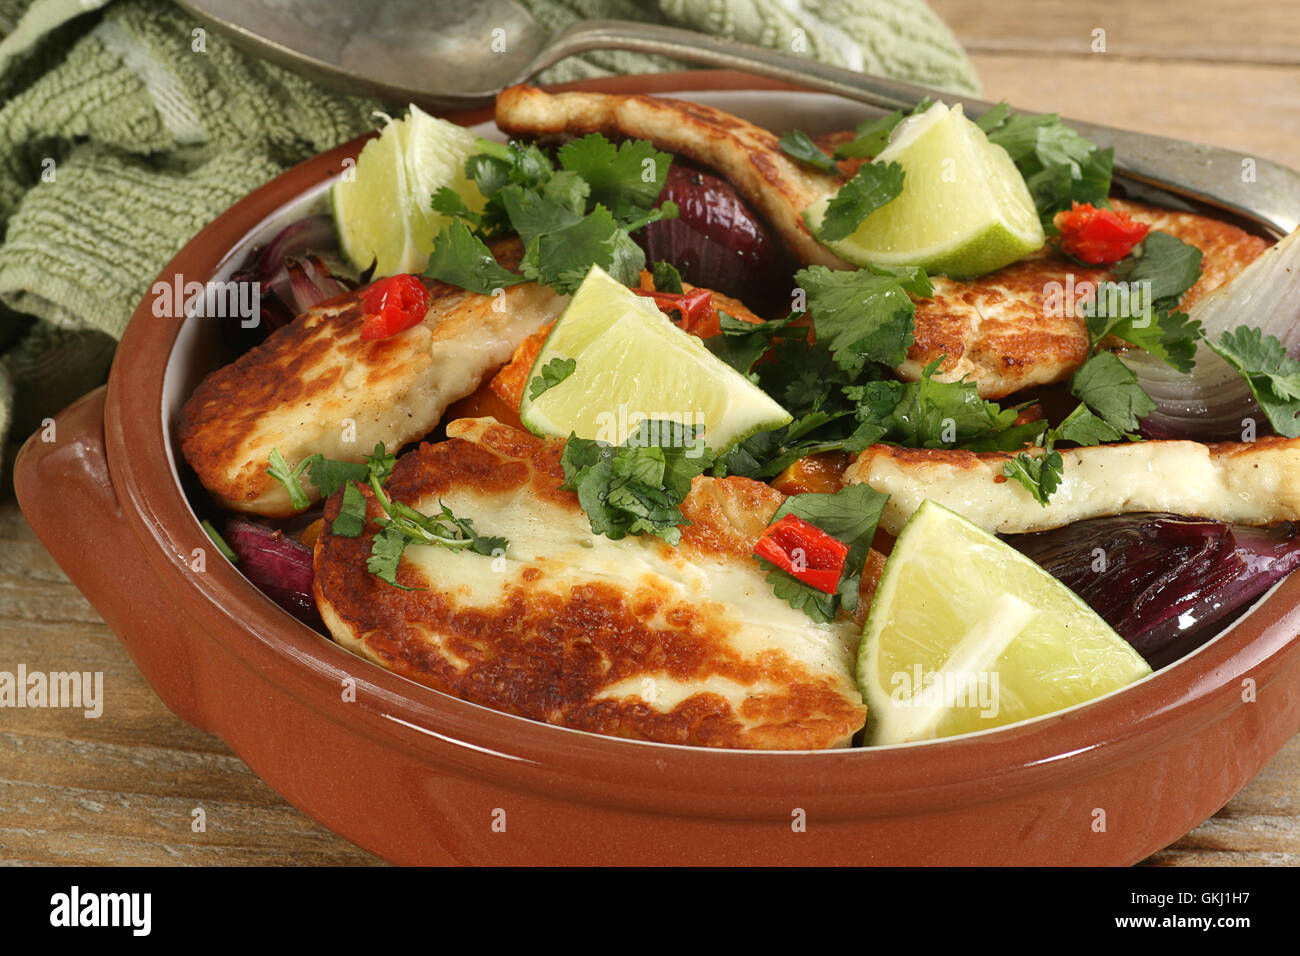 grilled halloumi with red onion and sweet potato in a terracotta bowl Stock Photo